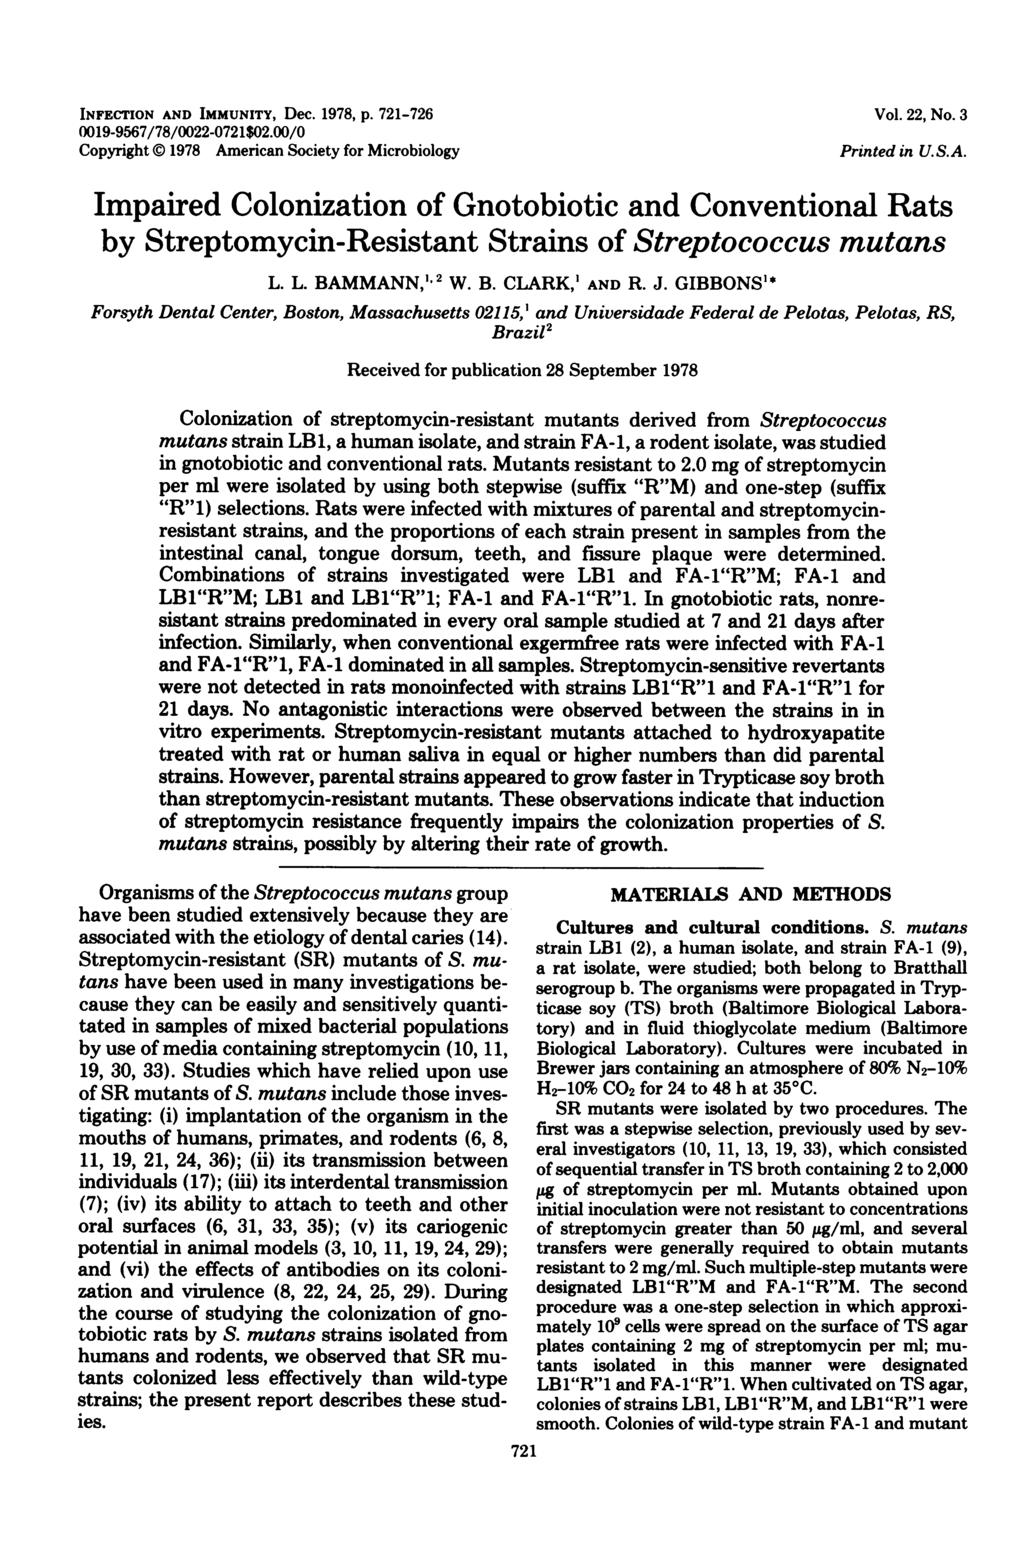 INFECTION AND IMMUNITY, Dec. 1978, p. 721-726 0019-9567/78/0022-0721$02.00/0 Copyright i 1978 American Society for Microbiology Vol. 22, No. 3 Printed in U.S.A. Impaired Colonization of Gnotobiotic and Conventional Rats by Streptomycin-Resistant Strains of Streptococcus mutans L.